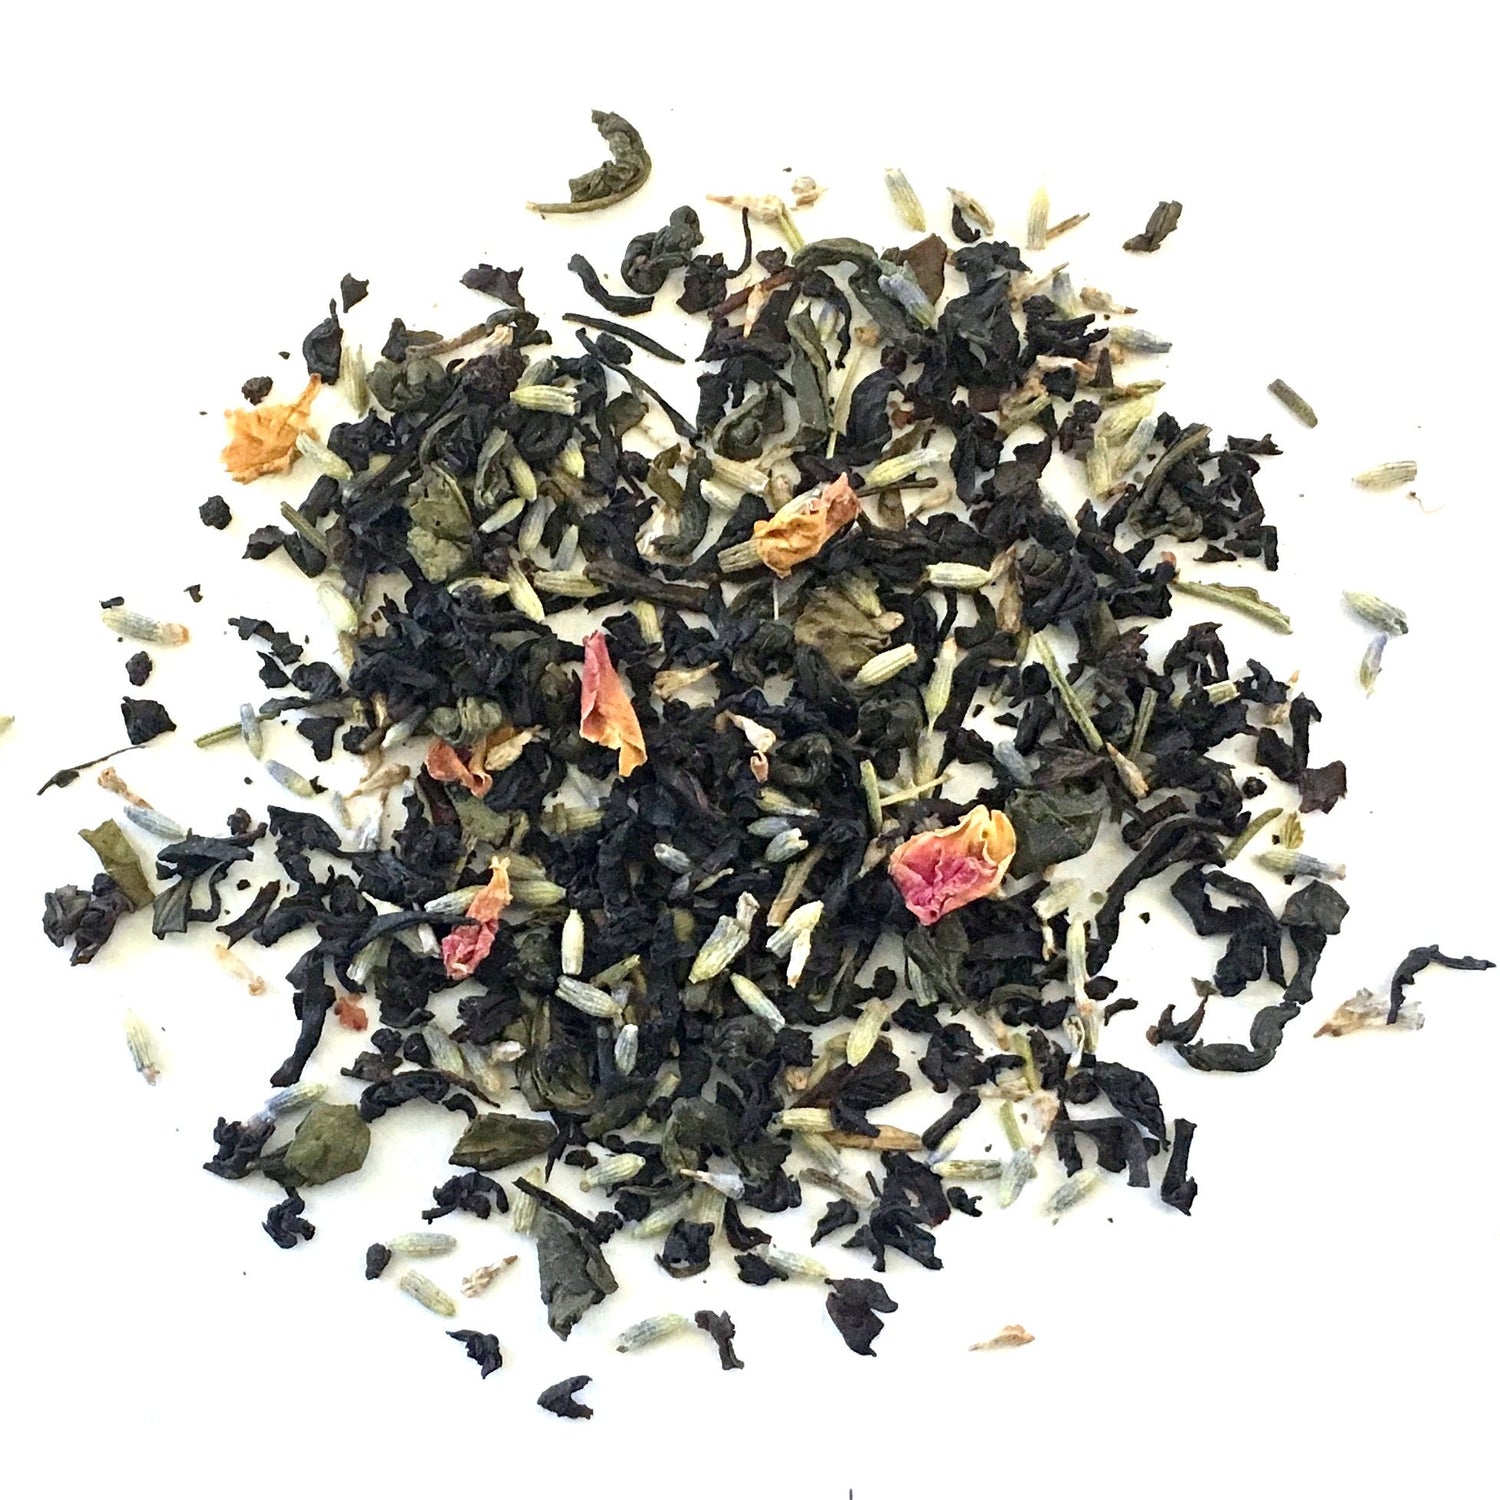 Daily Fusion - Black tea and Green tea with lavender, rose petals and a hint of vanilla - Silver Tips Tea's Loose Leaf Tea